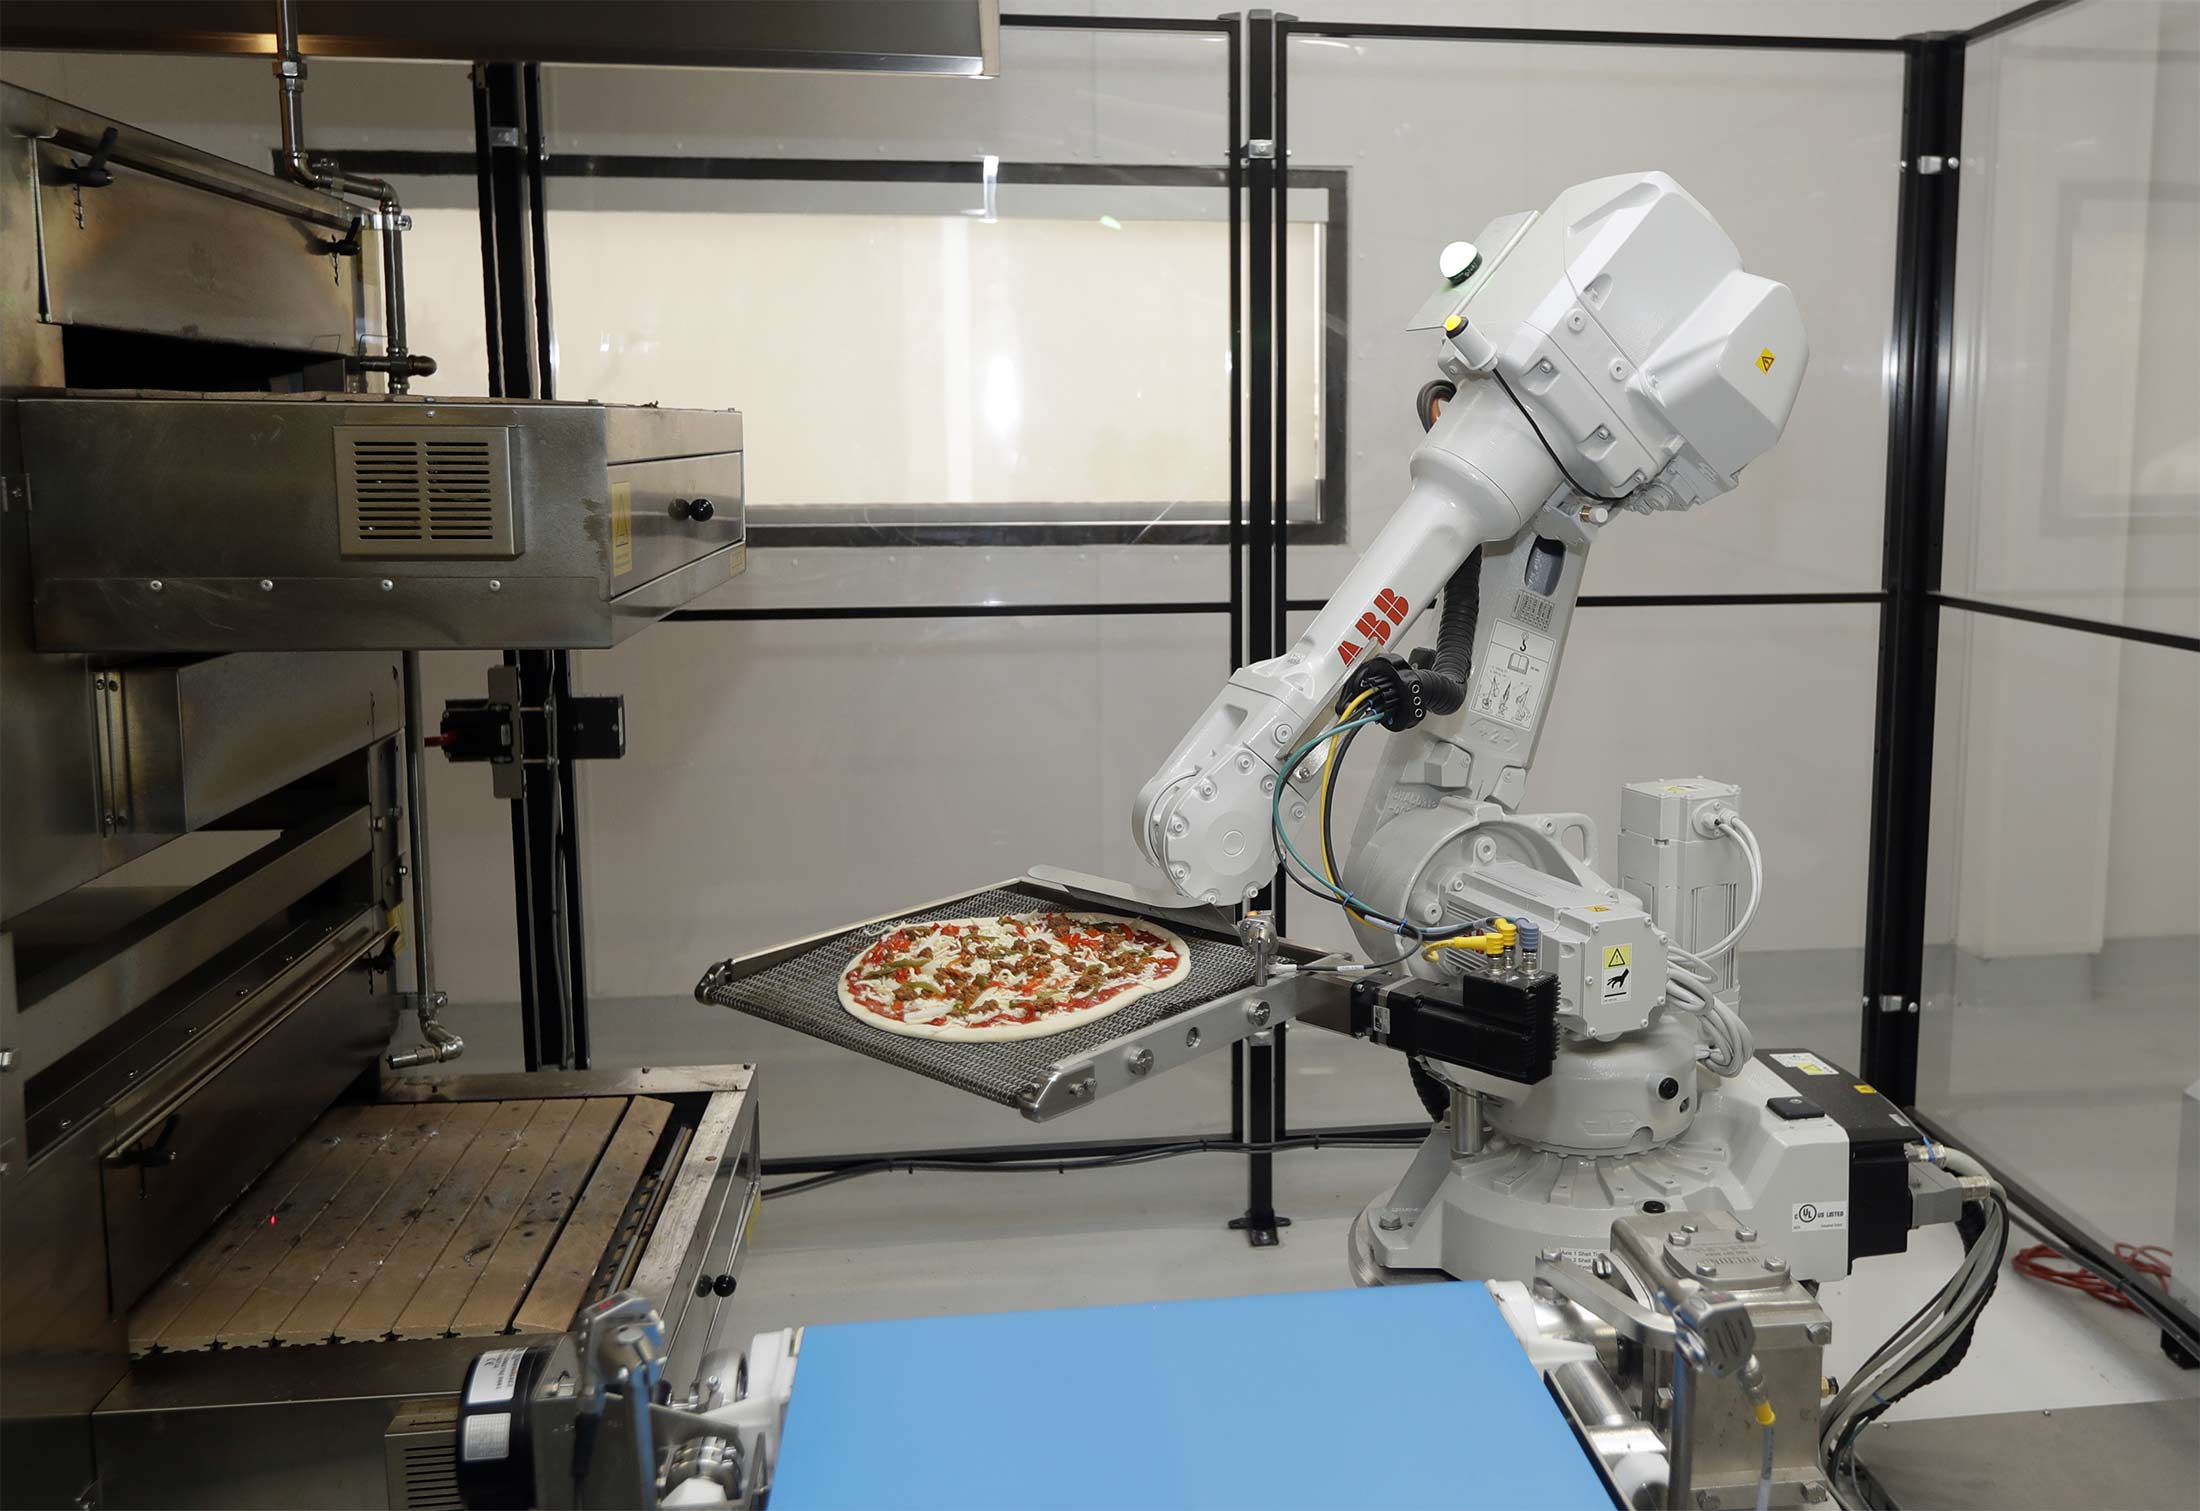 A robot places a pizza into an oven at Zume Inc. in Mountain View, Calif.